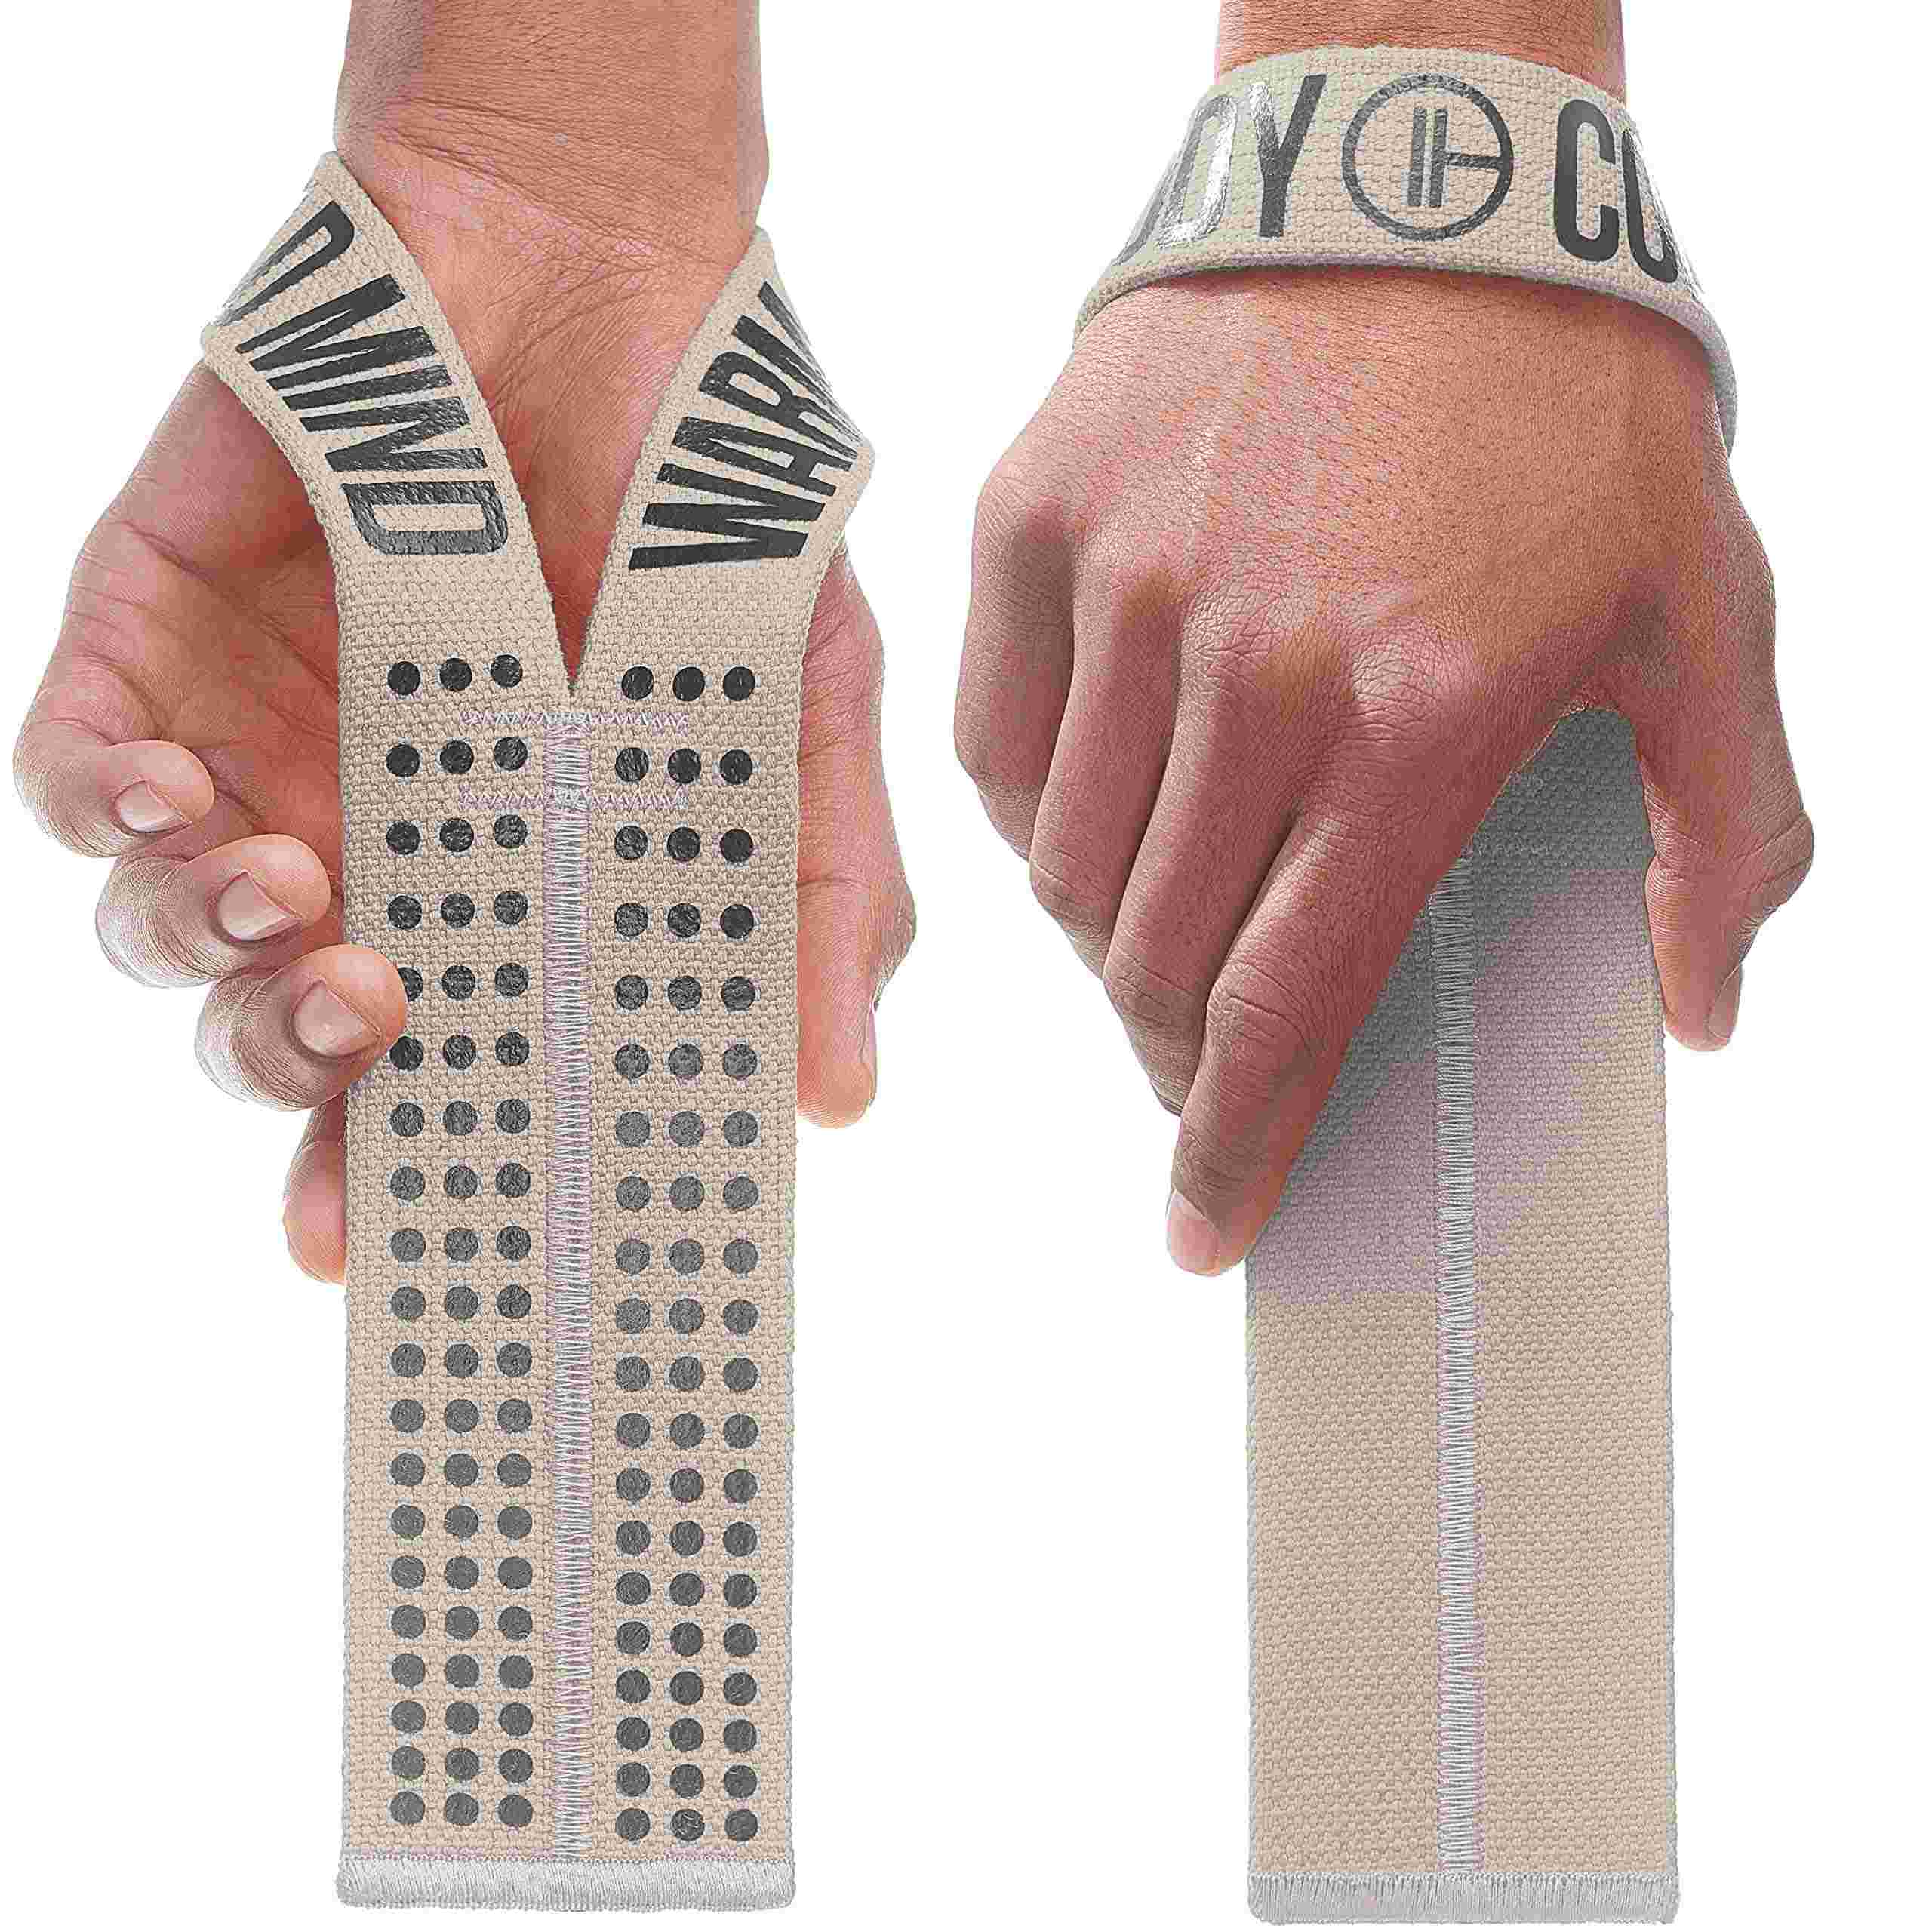  KKH Wrist Straps for Weightlifting, Lifting Straps